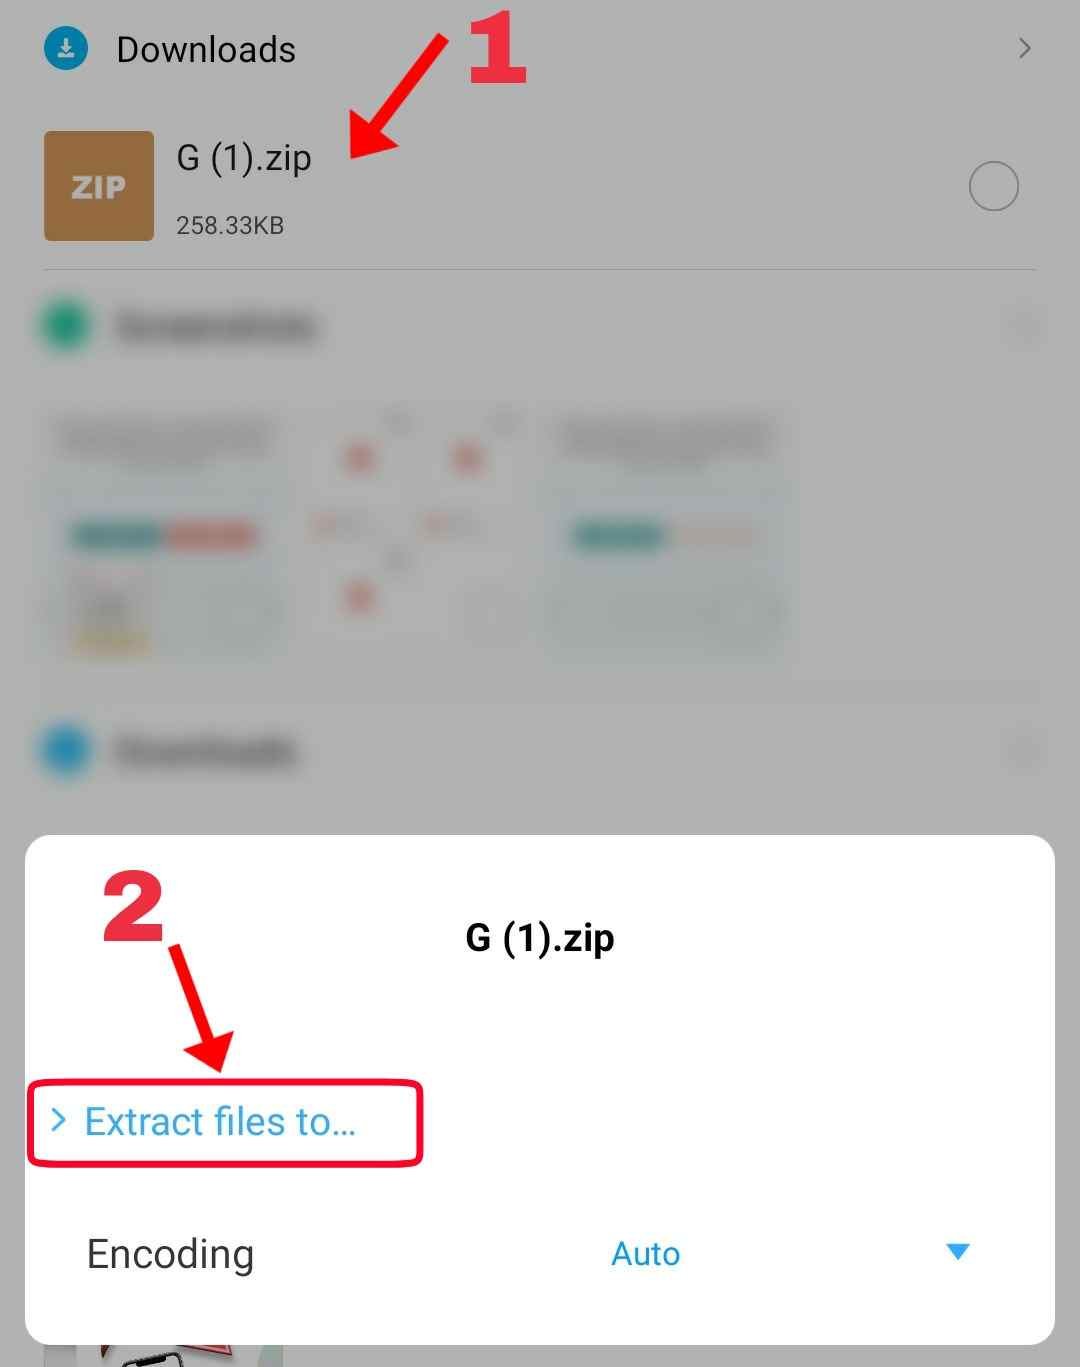 How to Convert PDF File to Image on Mobile Phone ?